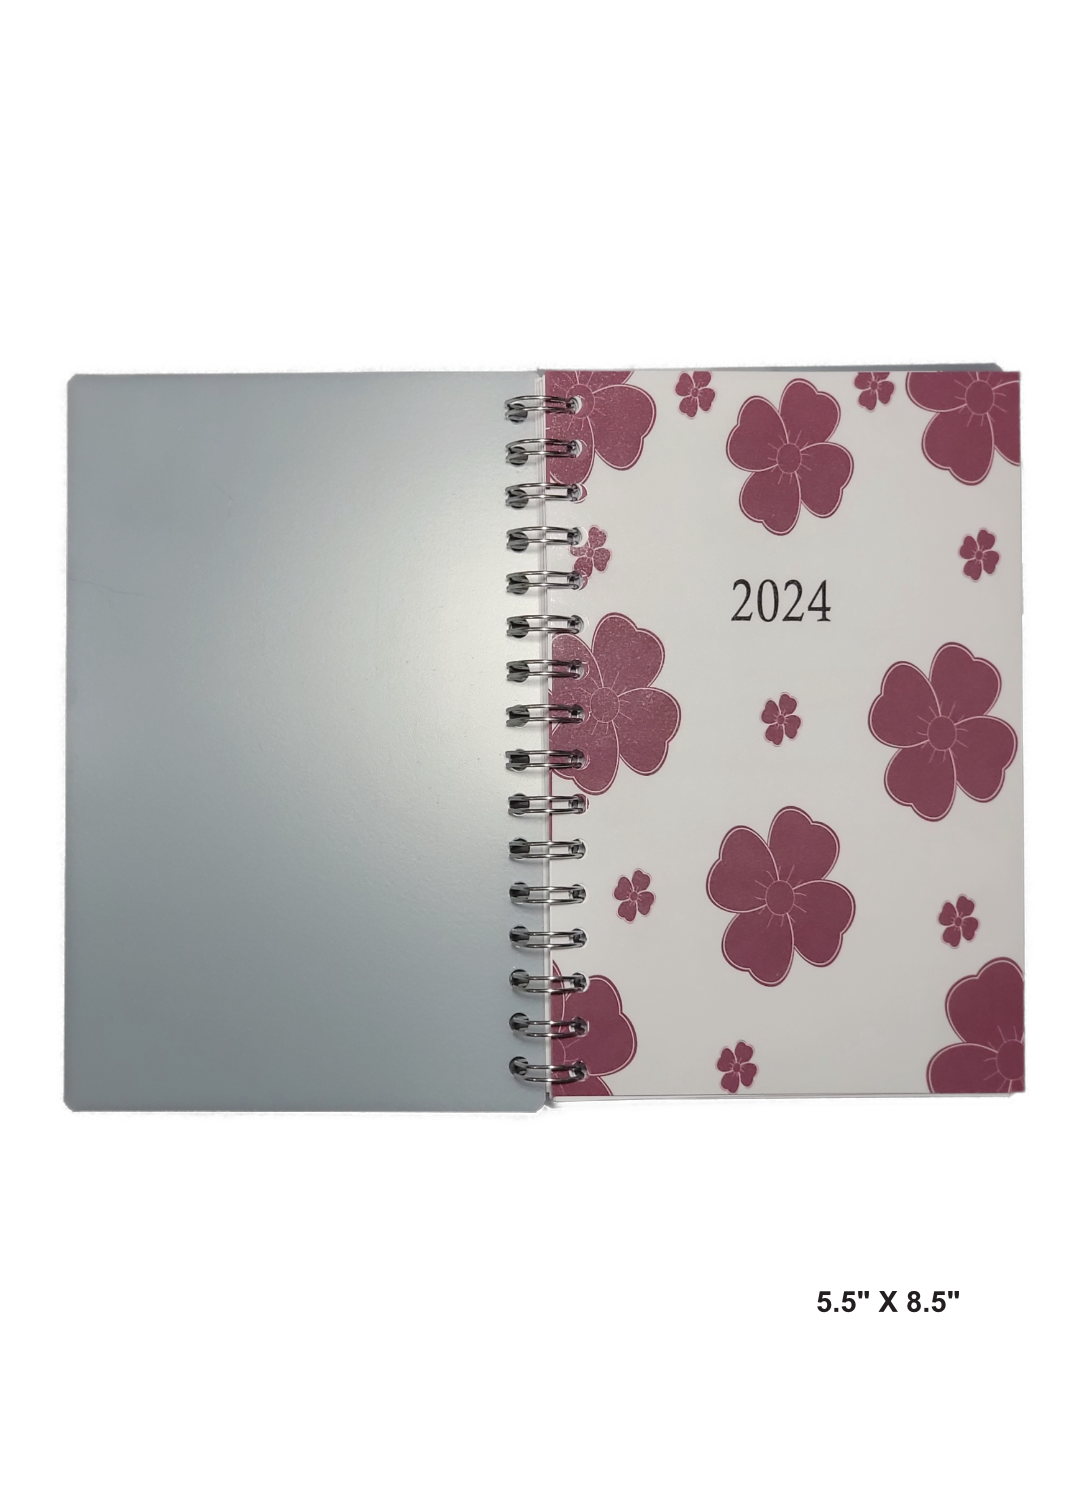 Image of a hand-made 5.5" x 8.5" 12 month planner with red flowers cover. A unique creation for note taking and organization. 